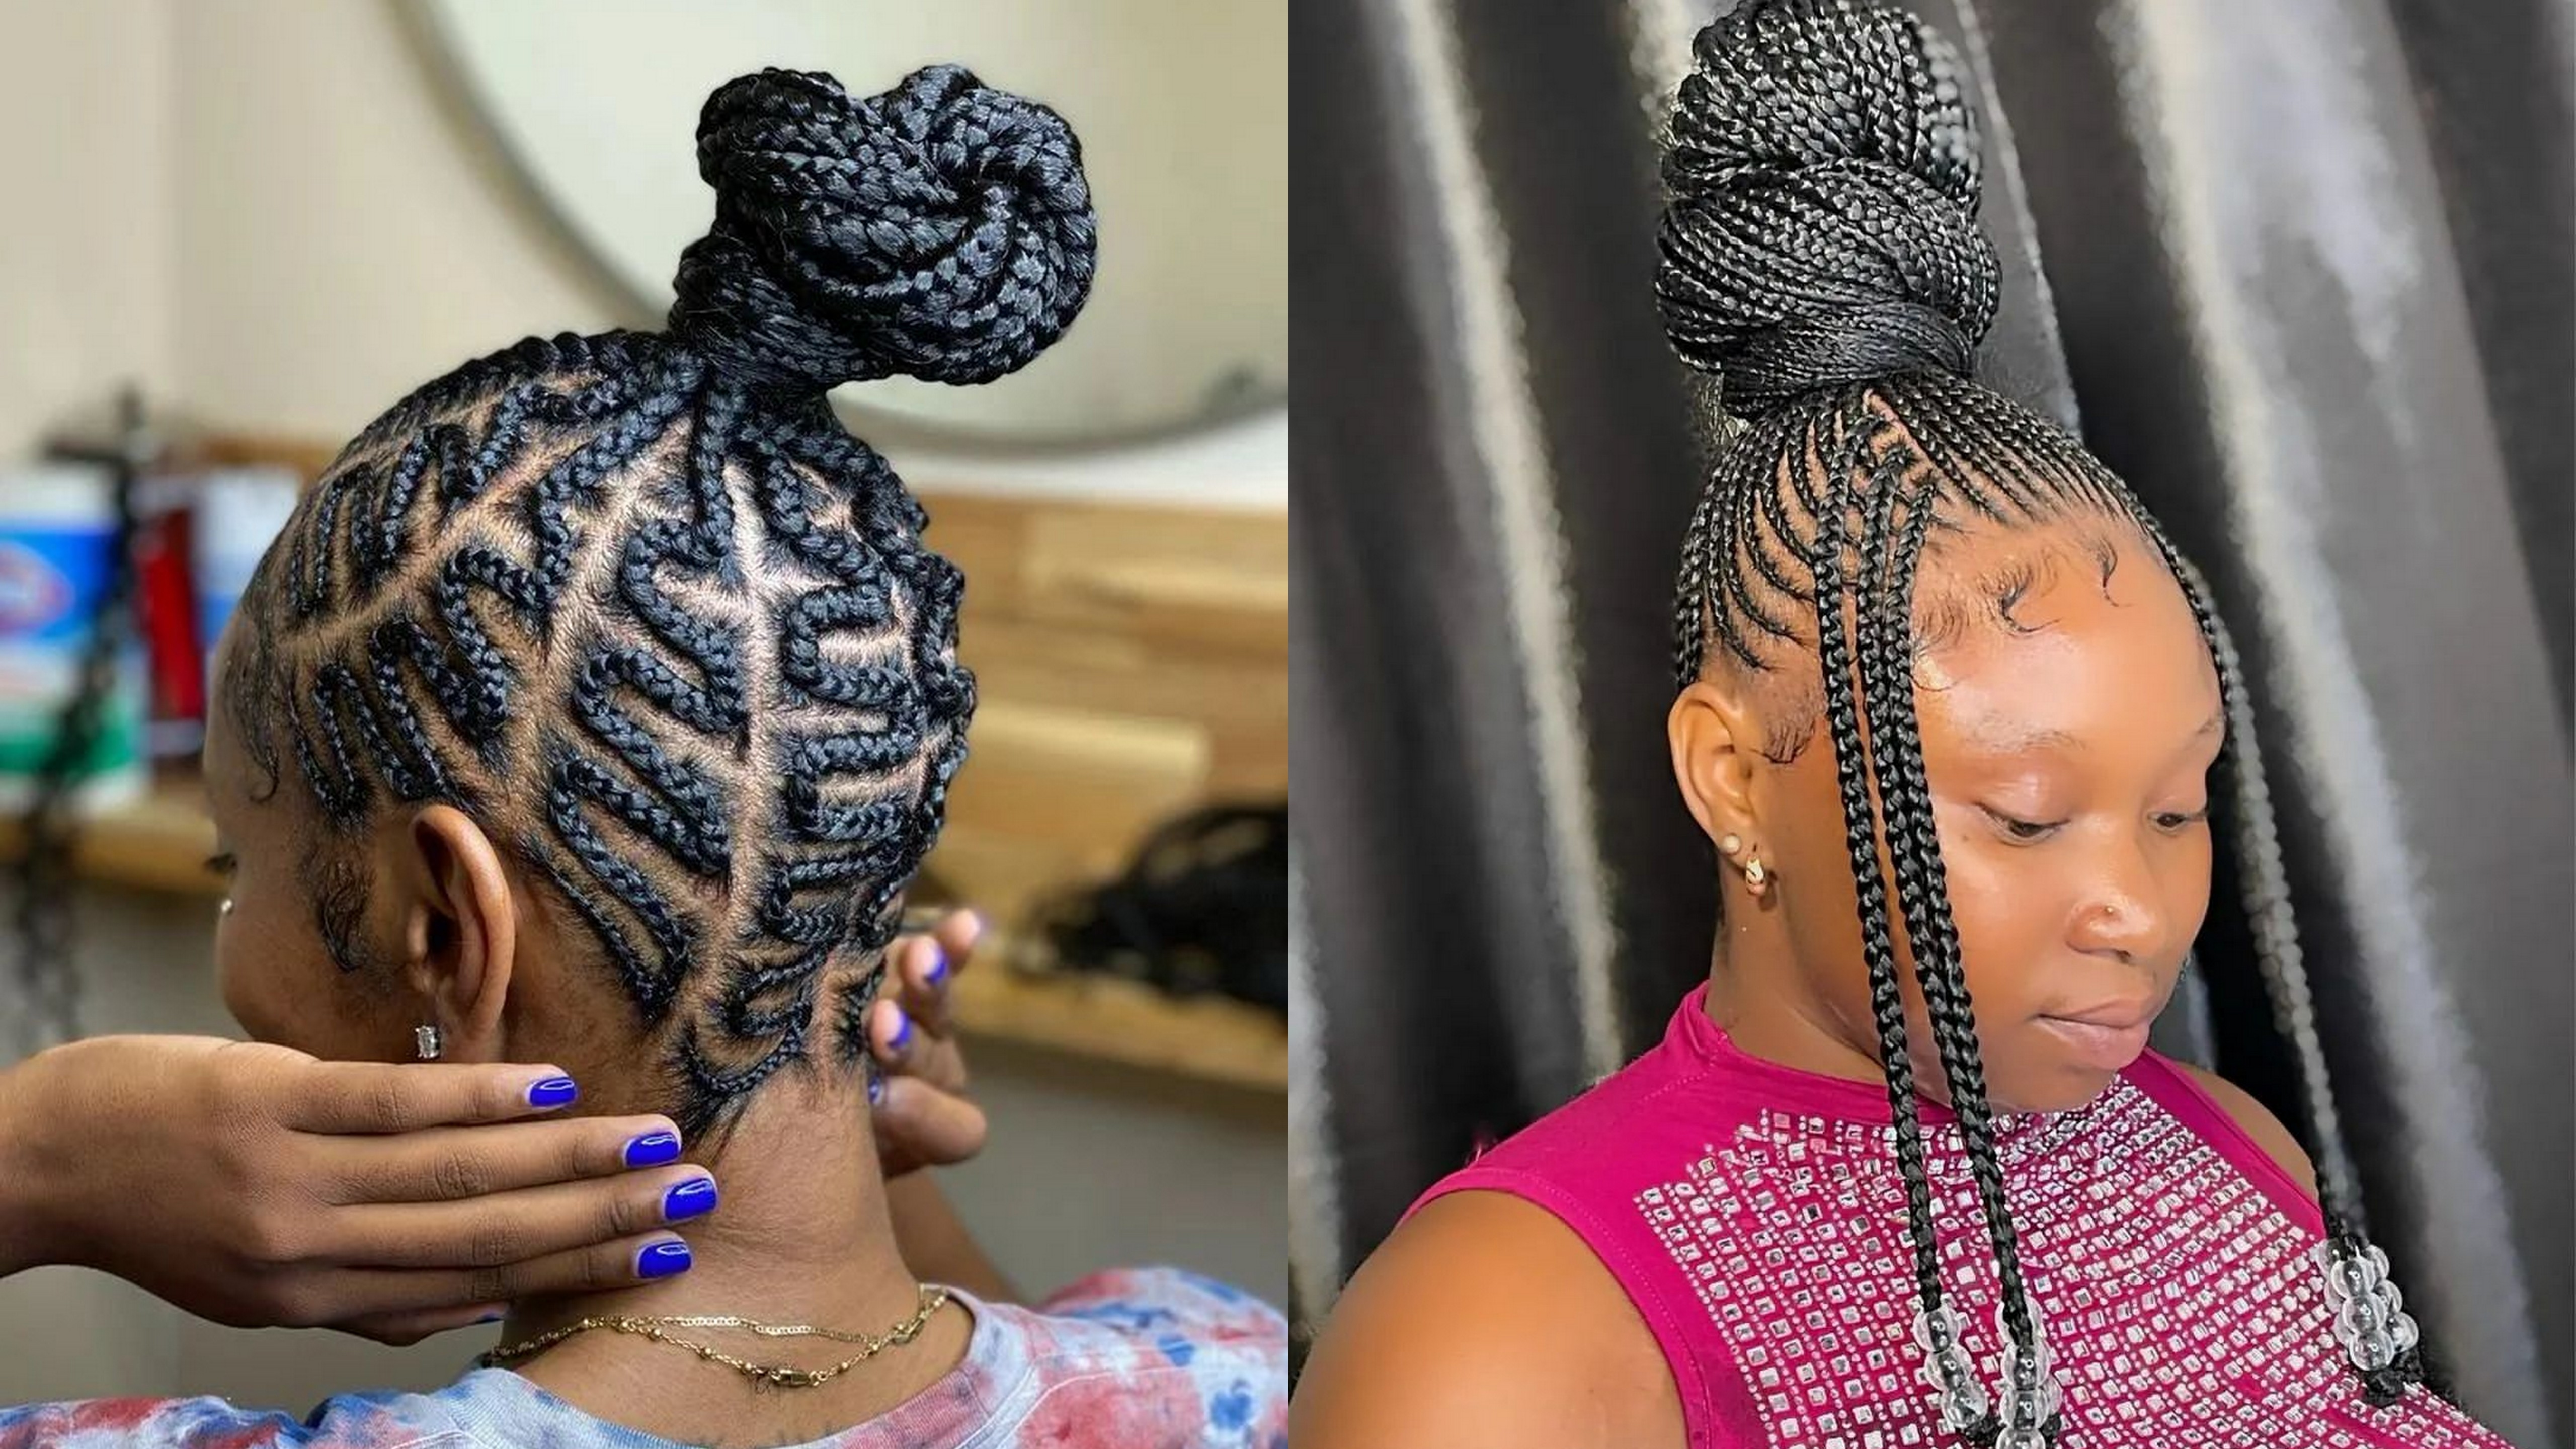 5 Trendy Hair Styles That Are Going To Make The Cut In 2023  GoodTimes  Lifestyle Food Travel Fashion Weddings Bollywood Tech Videos  Photos